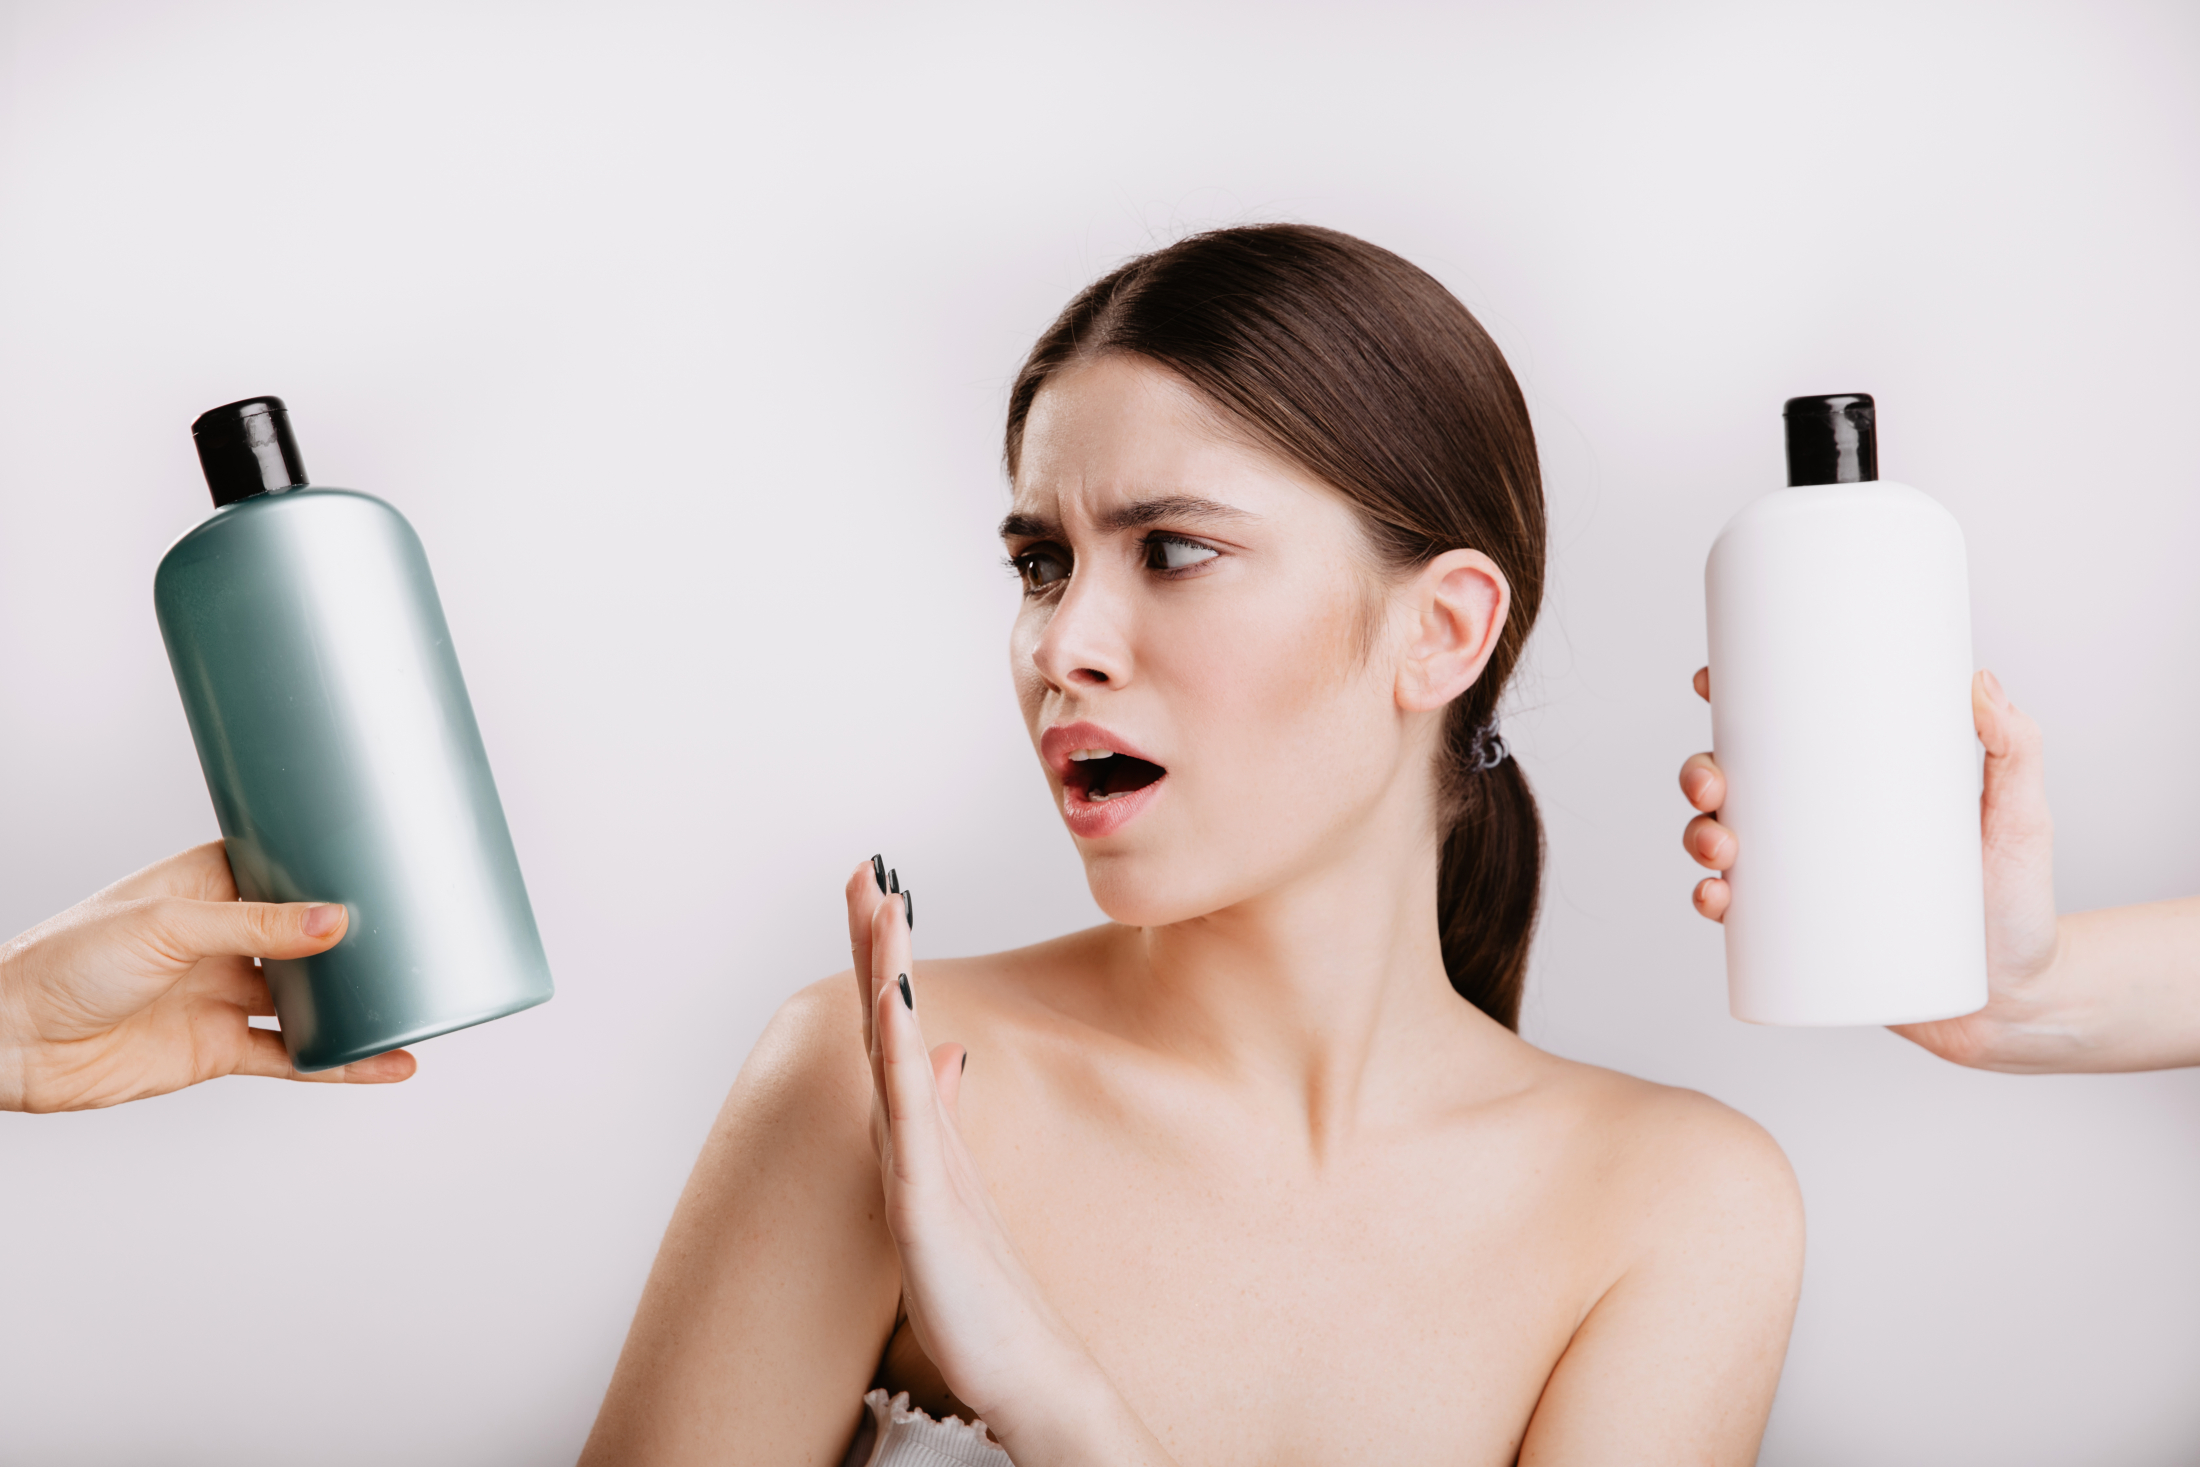 snapshot-of-beautiful-lady-on-white-wall-girl-refuses-to-use-shampoo-with-chemicals-in-favor-of-natural.jpg